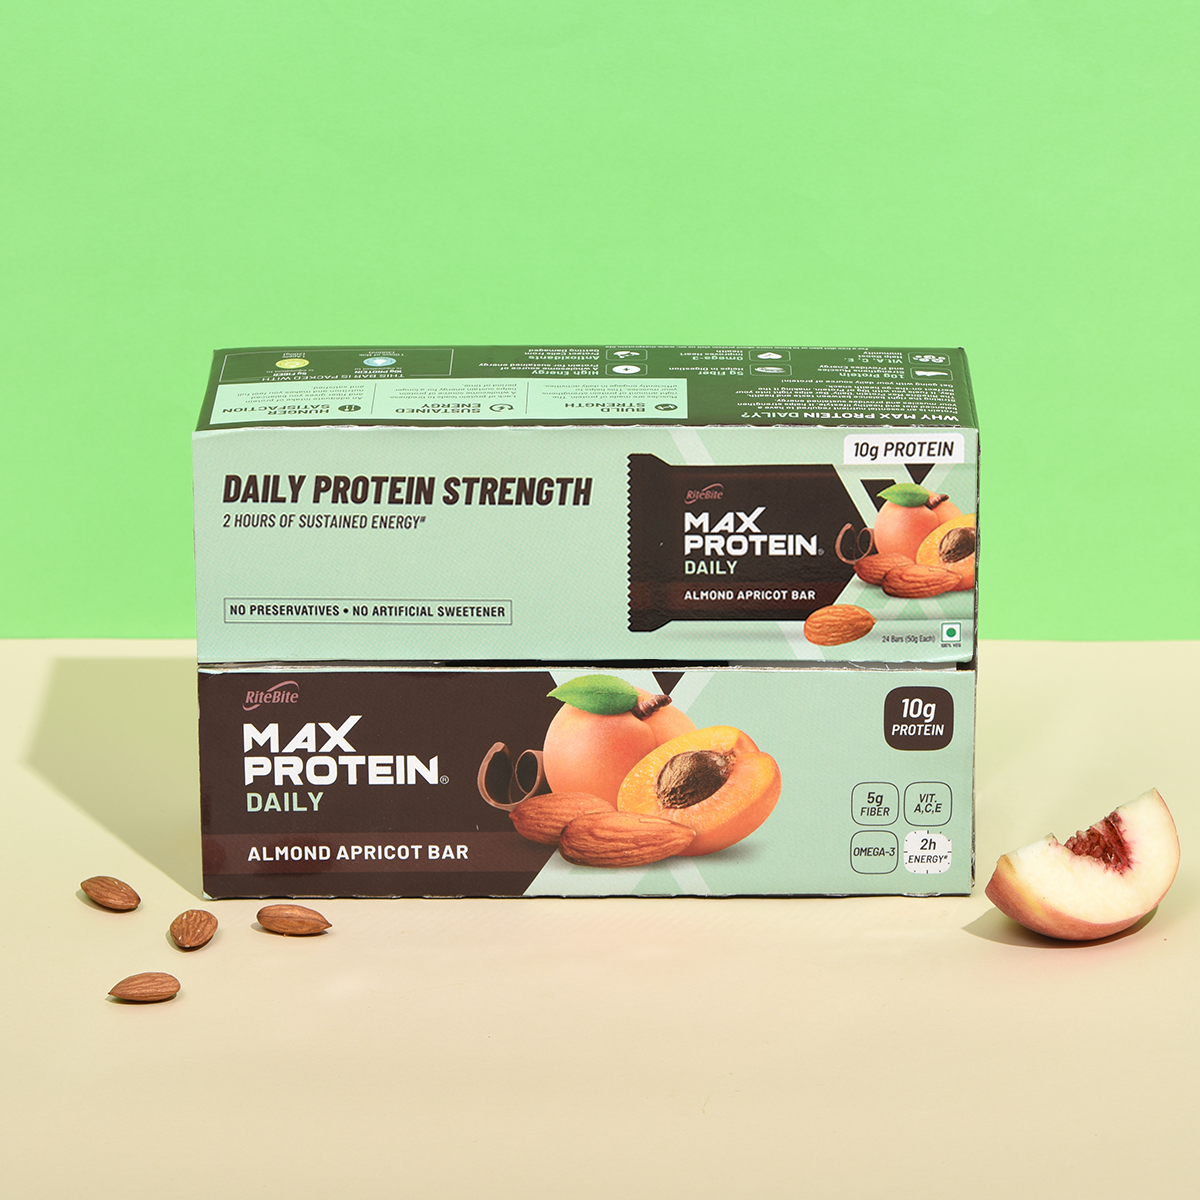 Max Protein Daily Almond Apricot